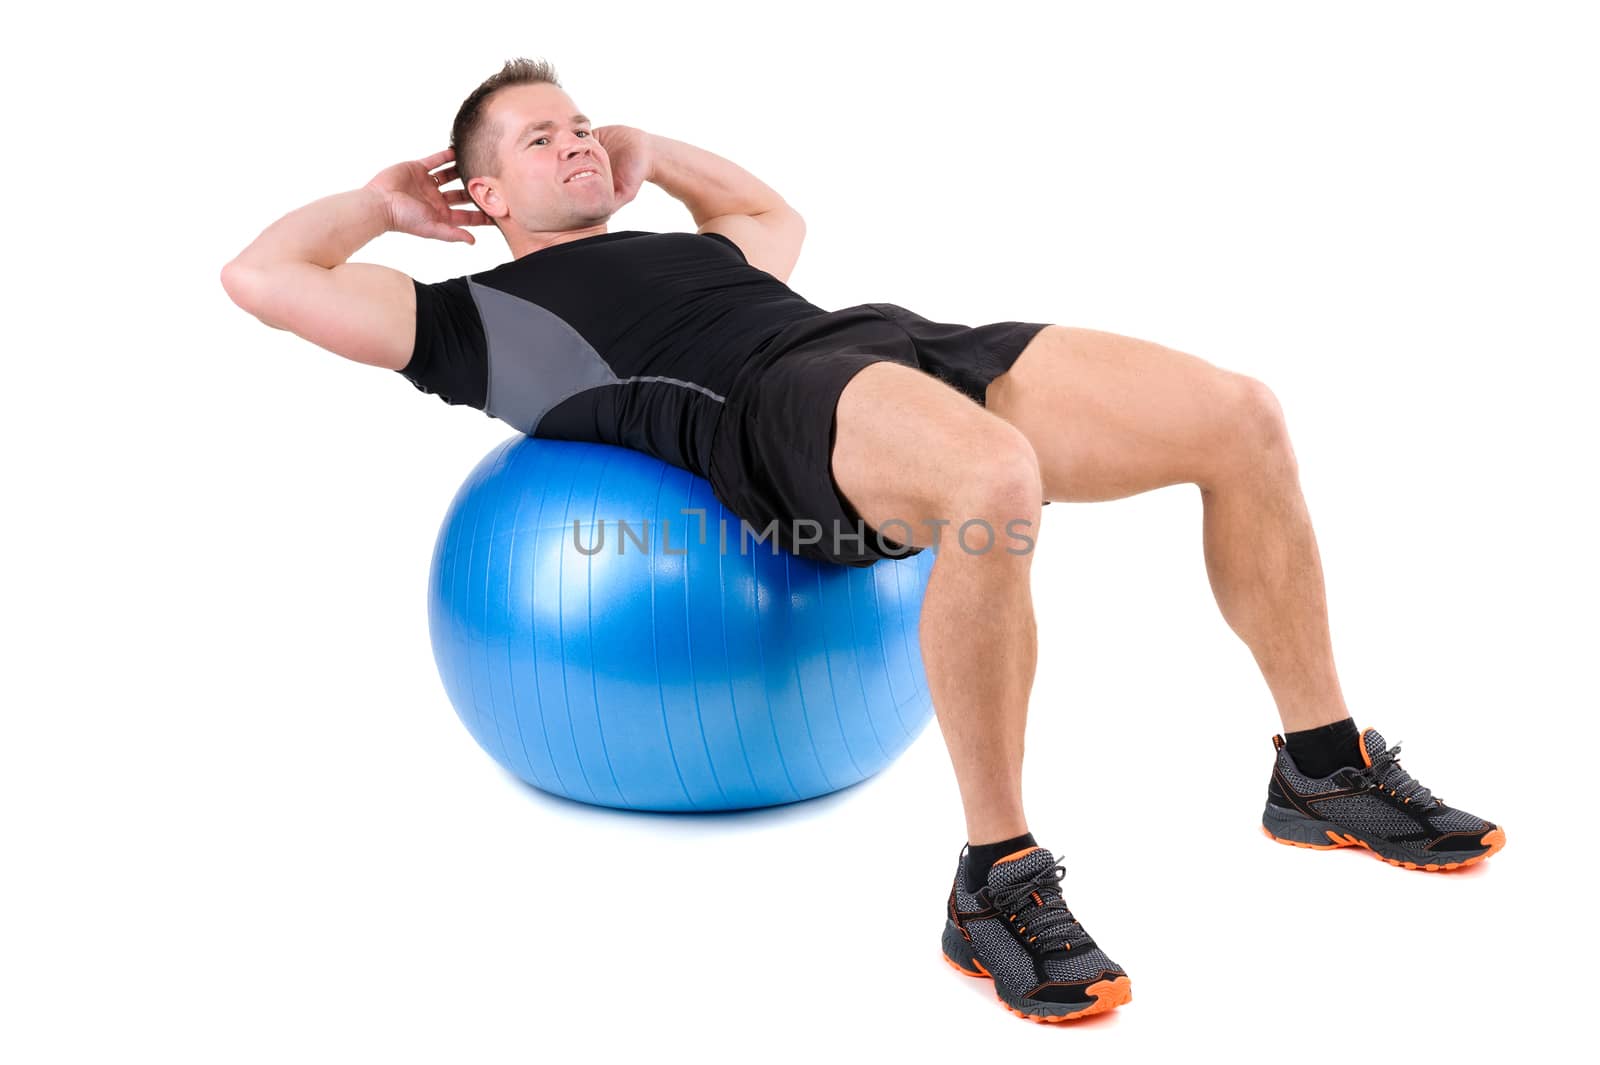 Abdominal Fitball Exercises by starush